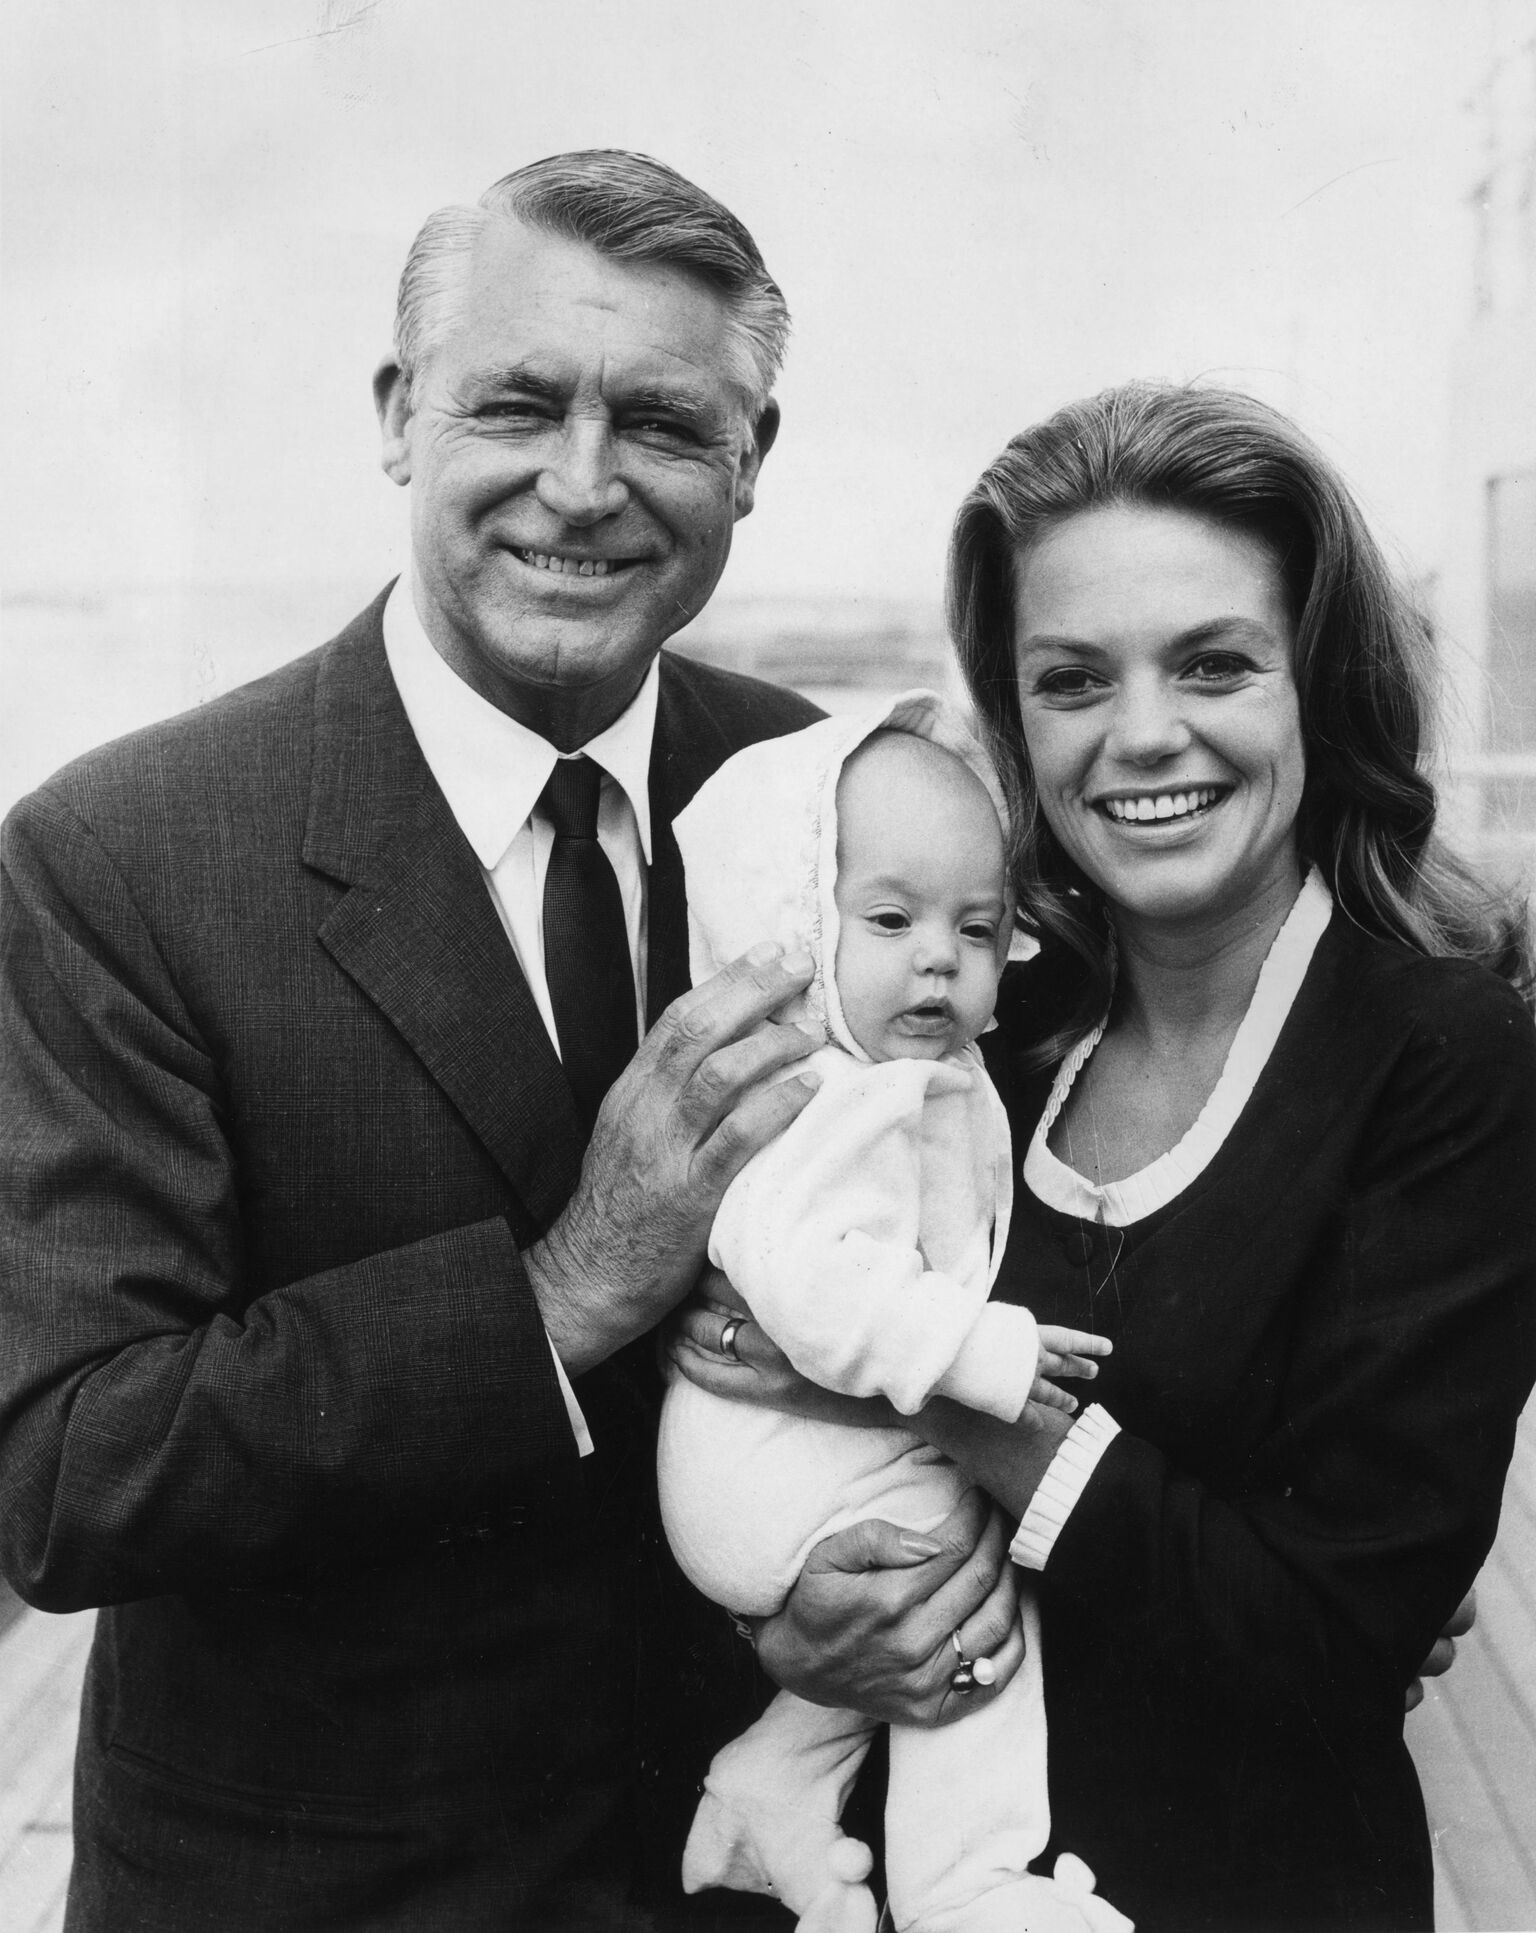 Cary Grant and Dyan Cannon with daughter Jennifer in 1966. I Image: Getty Images.